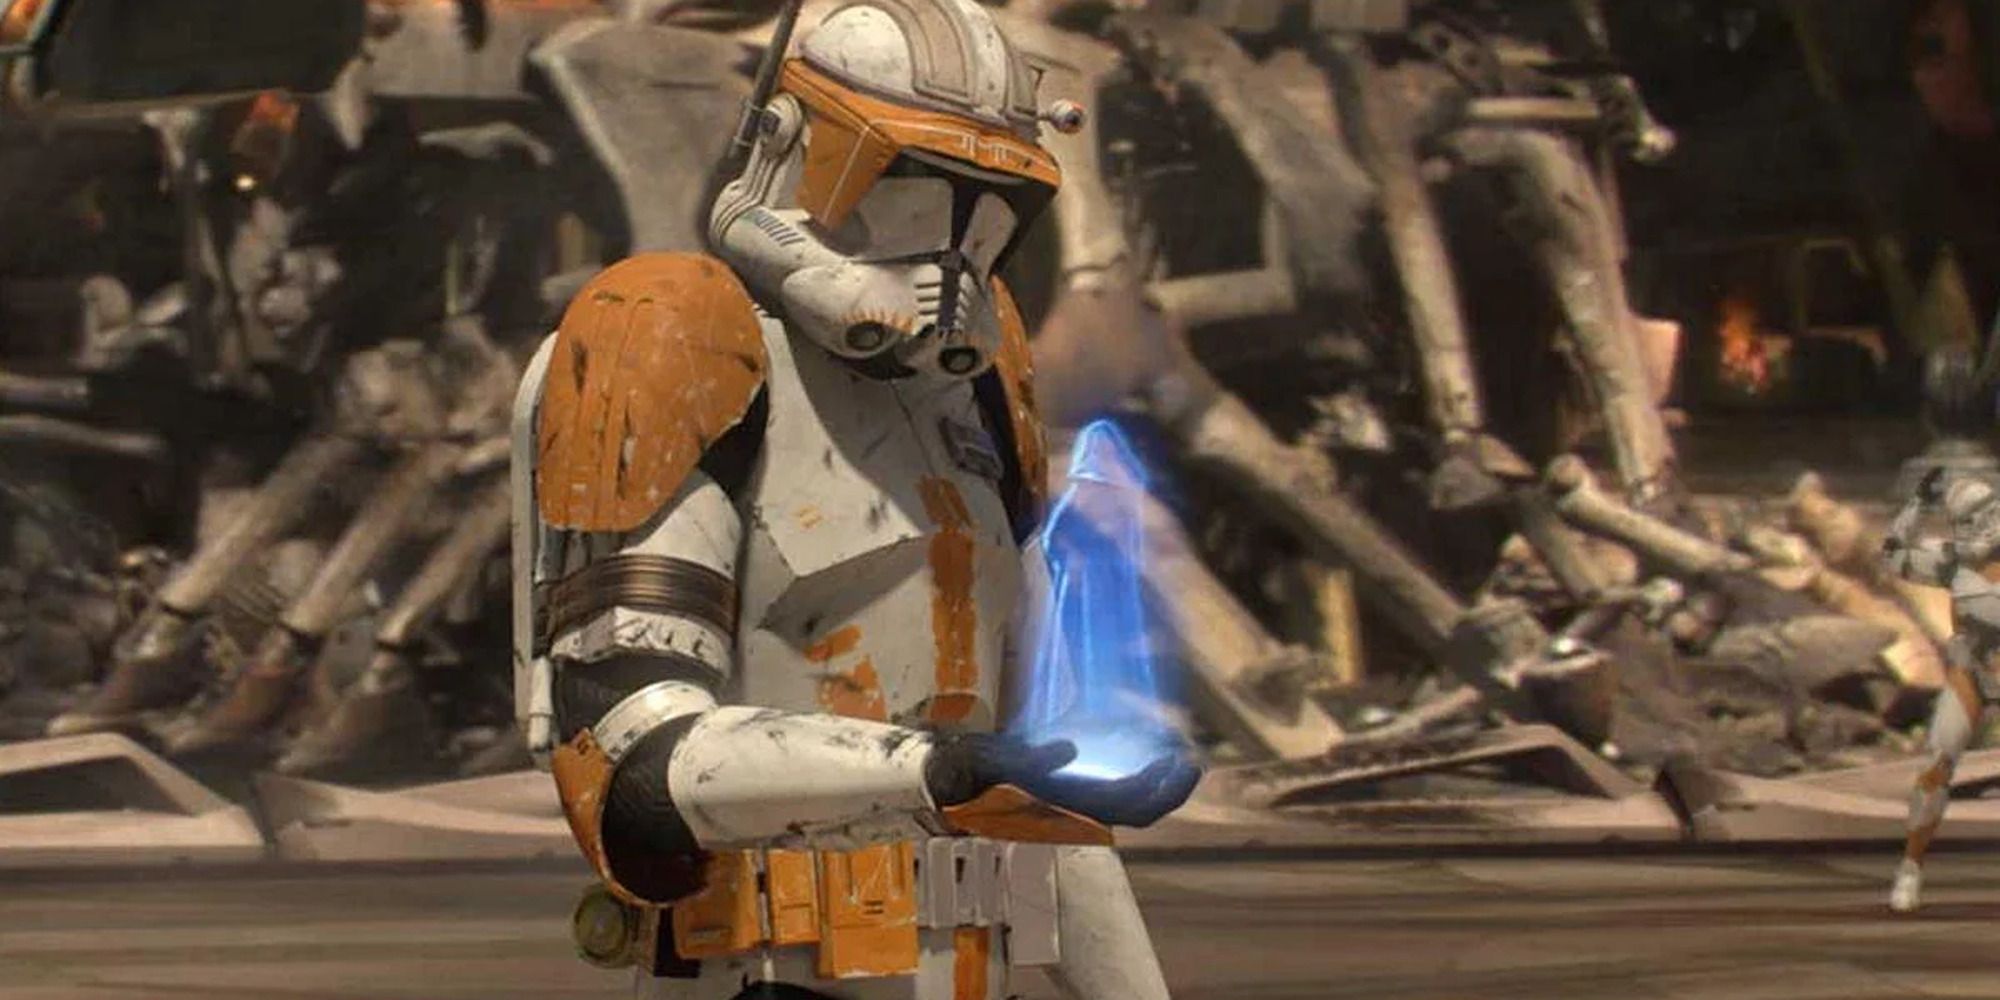 clone trooper in yellow armor looking at sinister hologram in battlefield